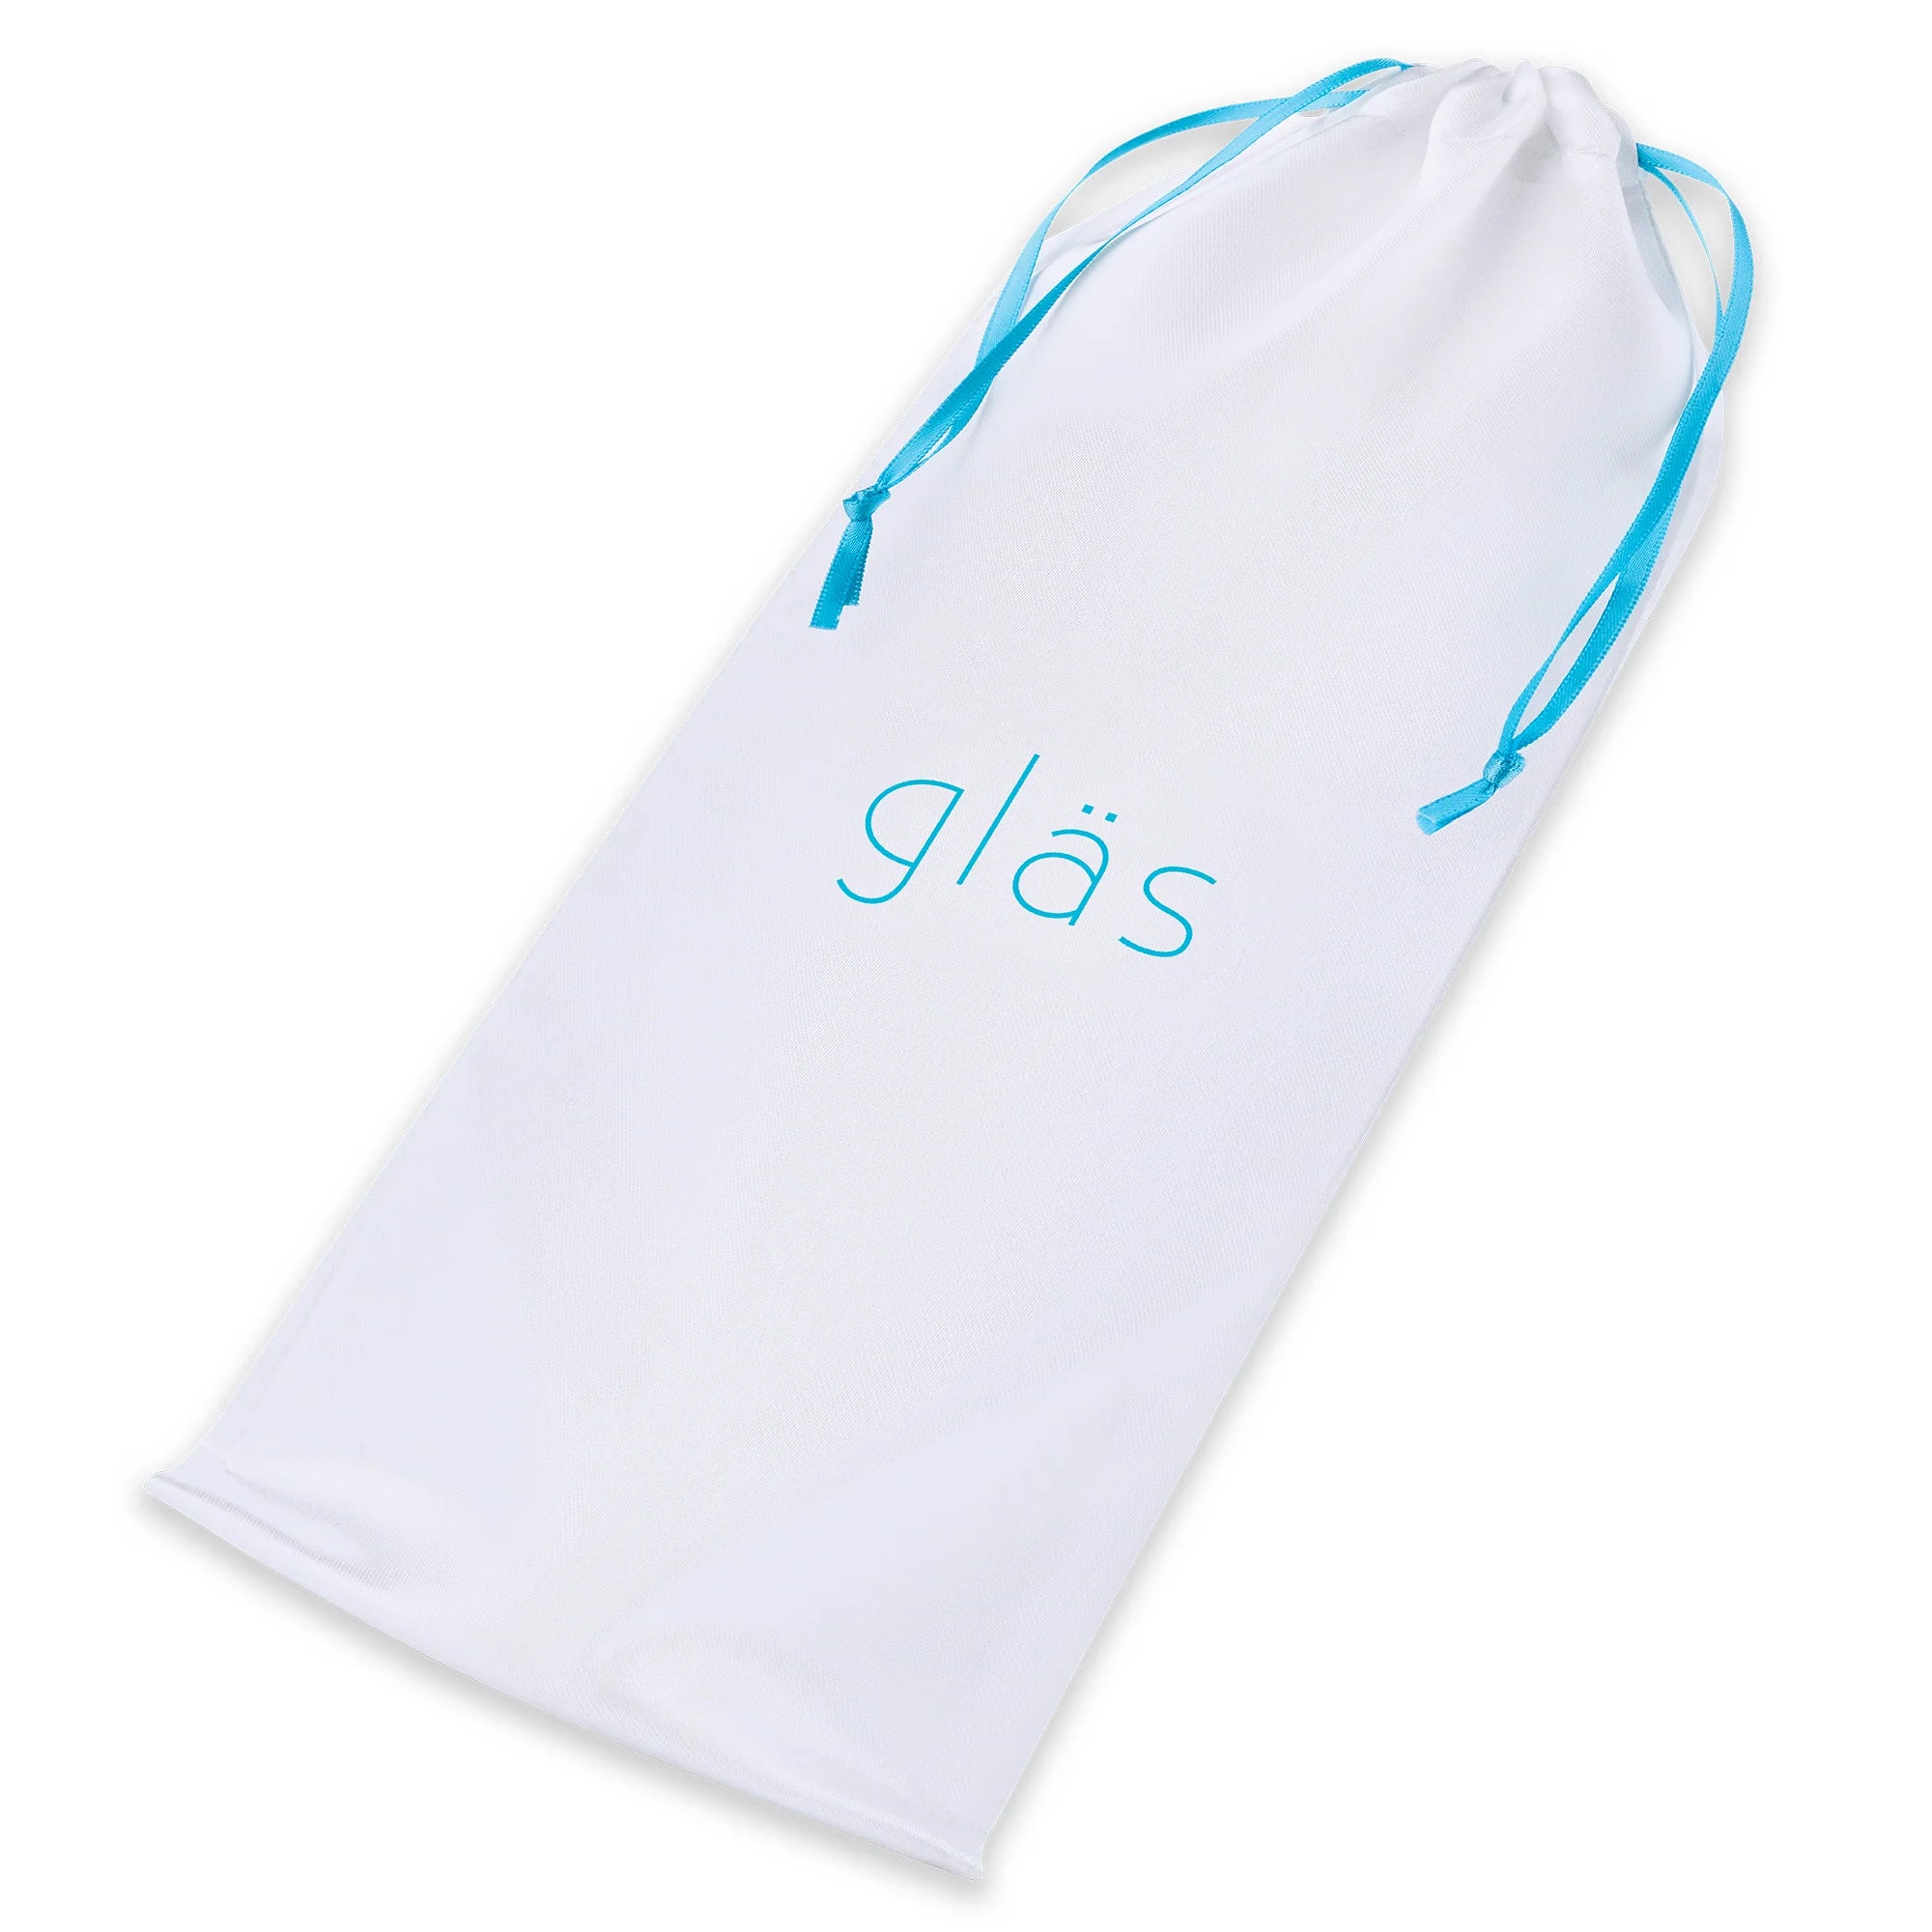 Gläs 11" Glass Fist Double Ended With Handle Grip - Rolik®